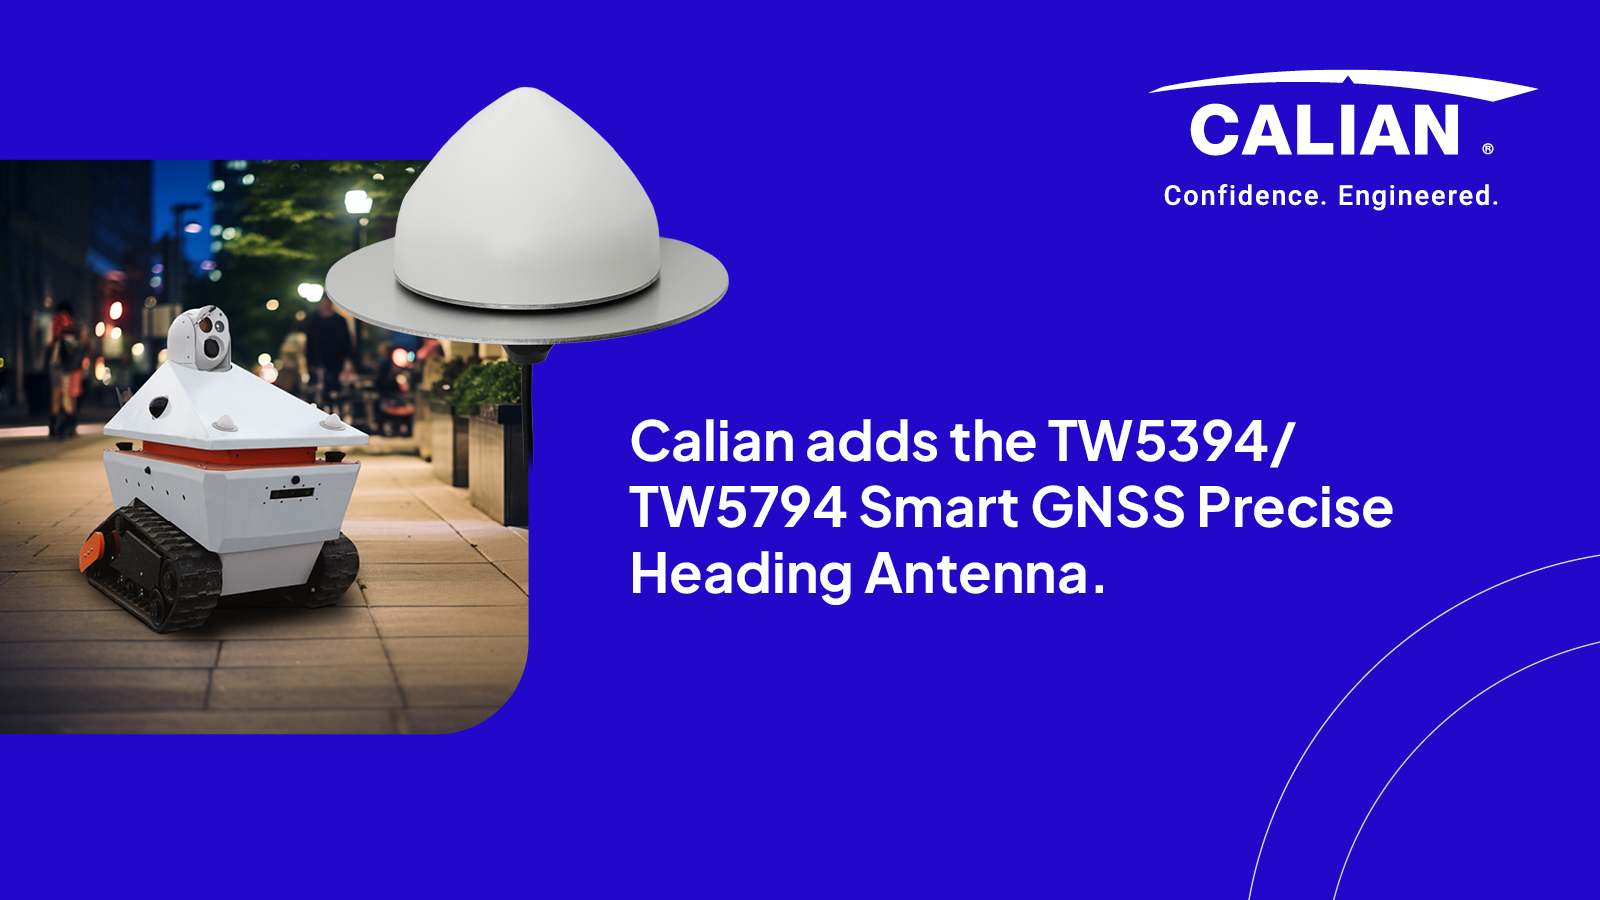 Calian adds the TW5394/TW5794 Smart GNSS Precise Heading Antenna to its line of Smart GNSS Antennas, targeting Robotics and Drone markets. 